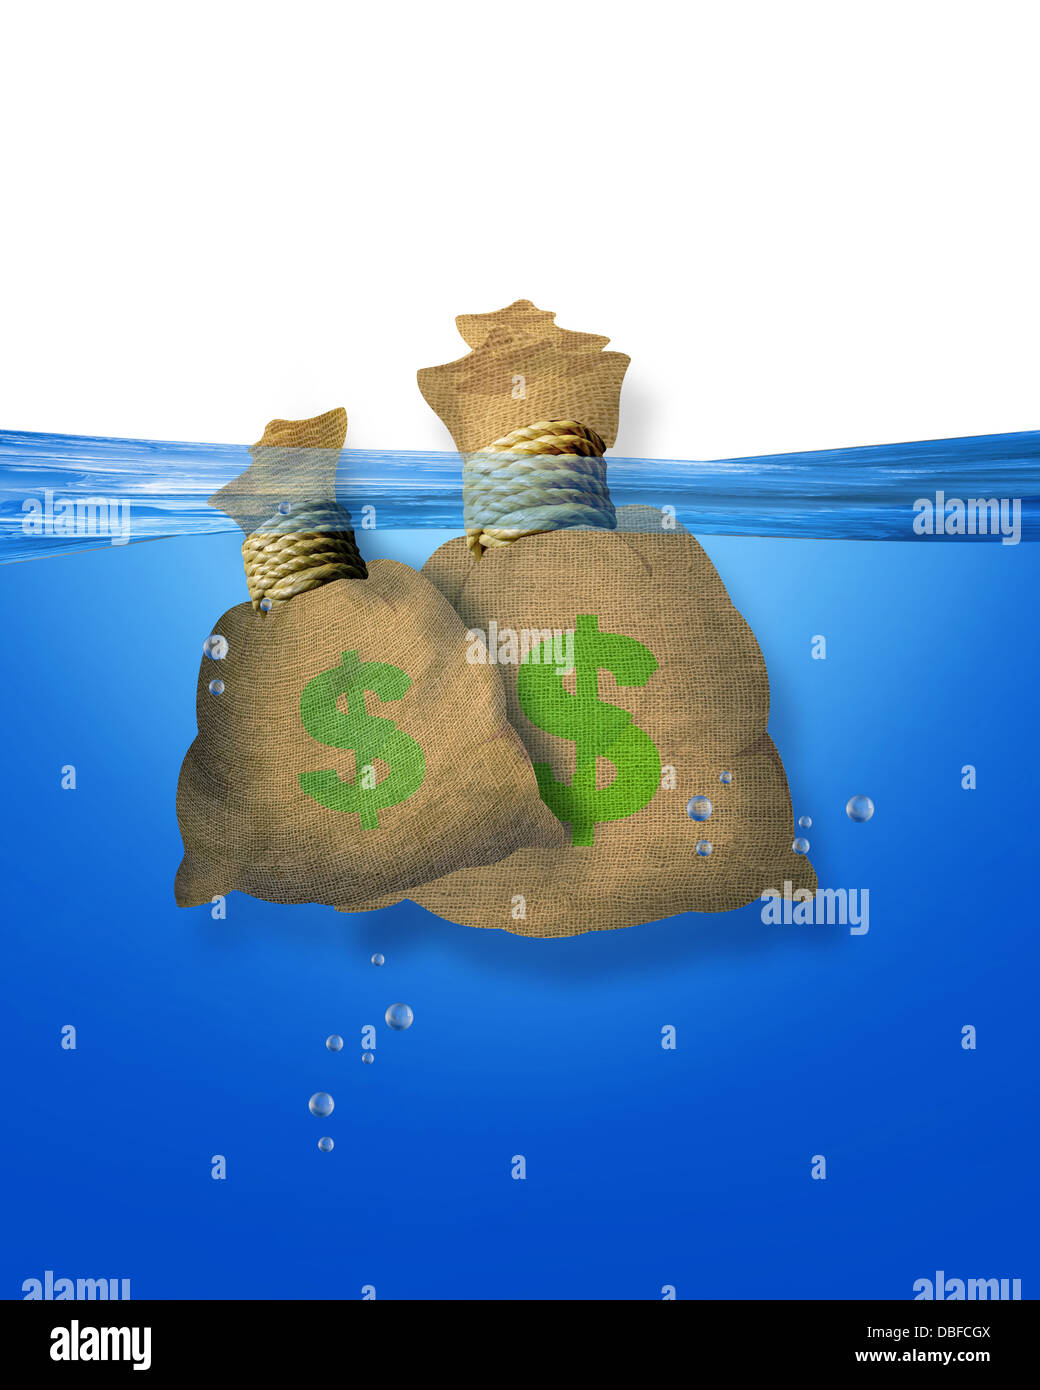 Money bags floating in blue water. Stock Photo